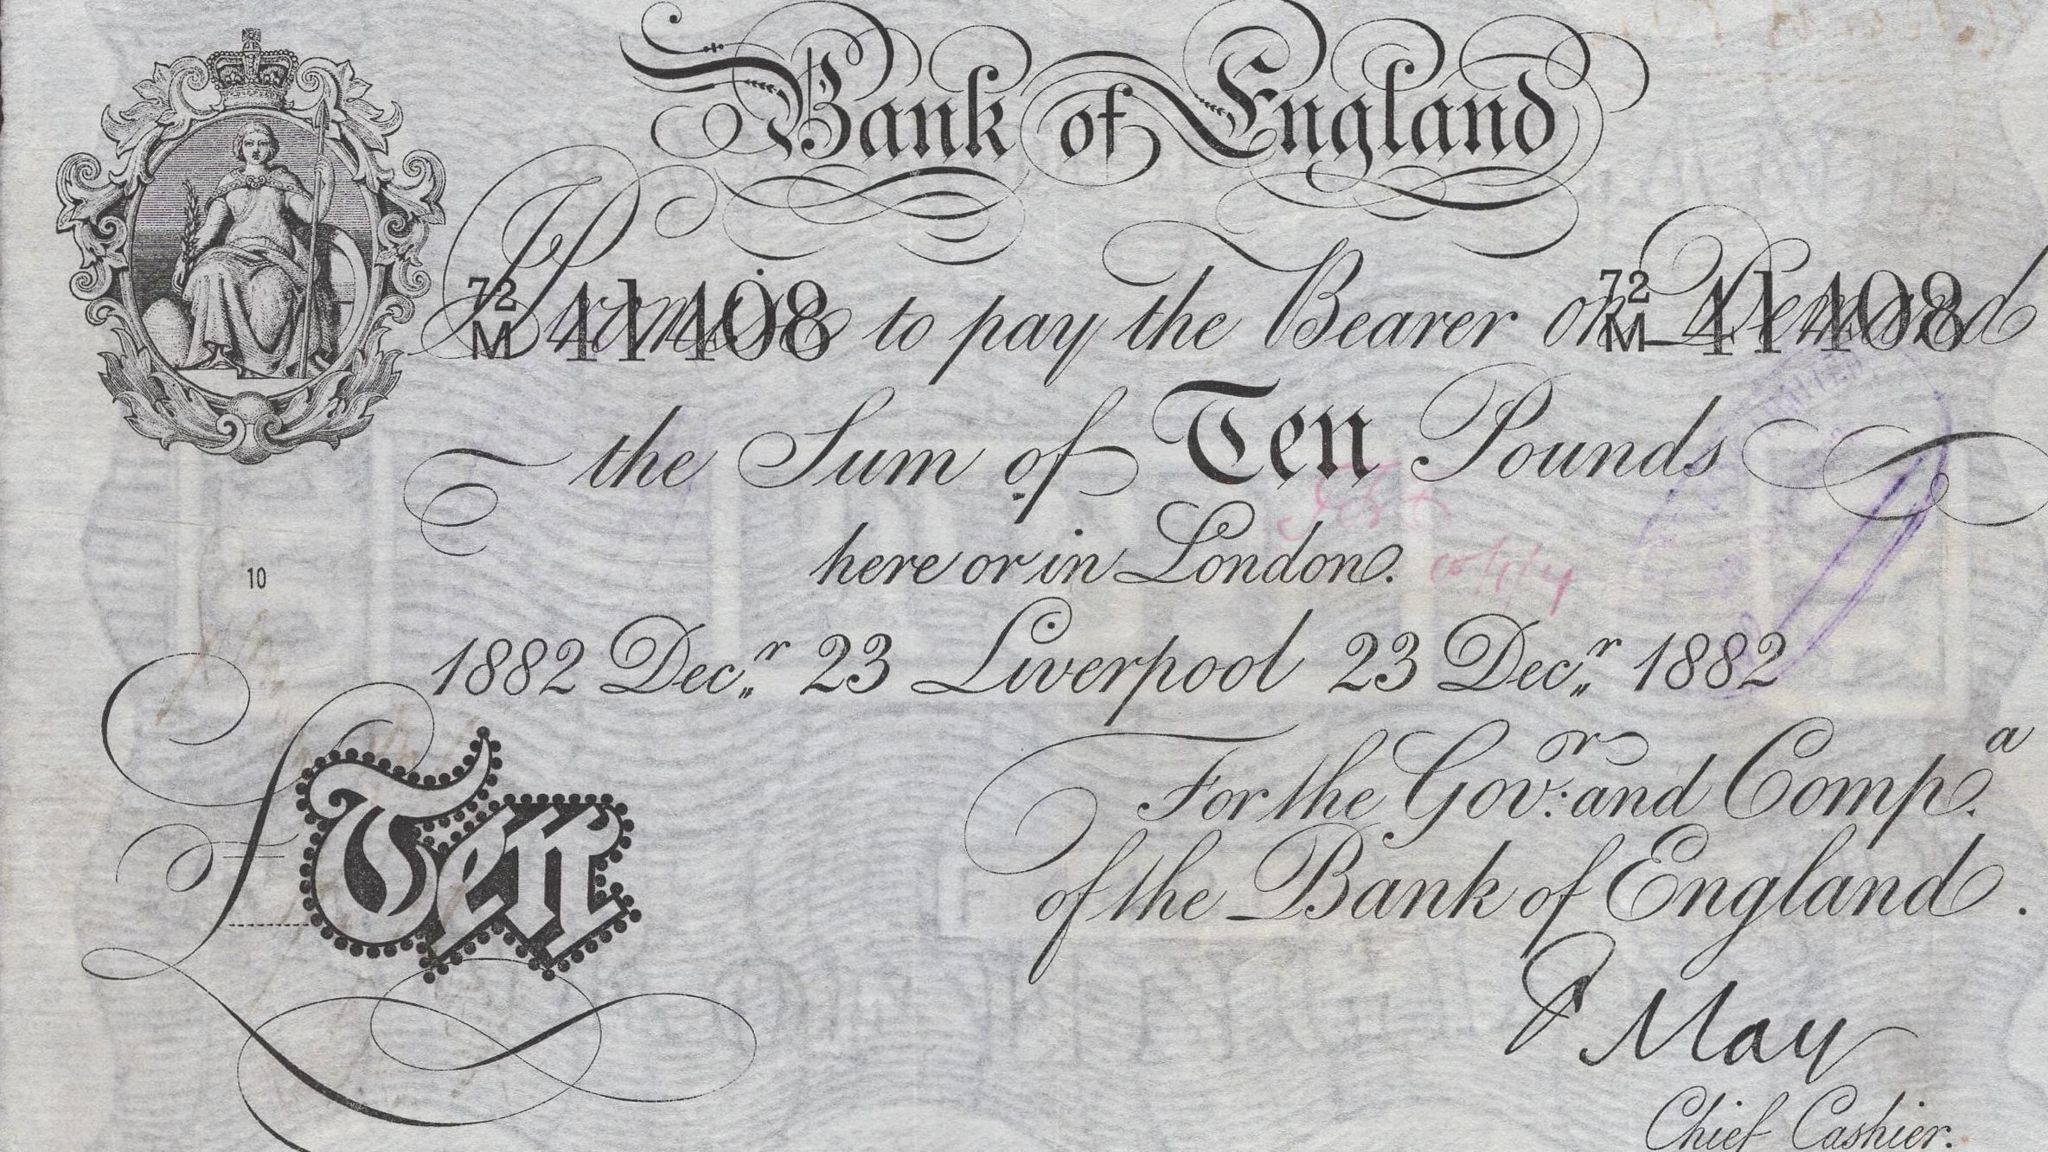 £10 banknote, signed by Frank May